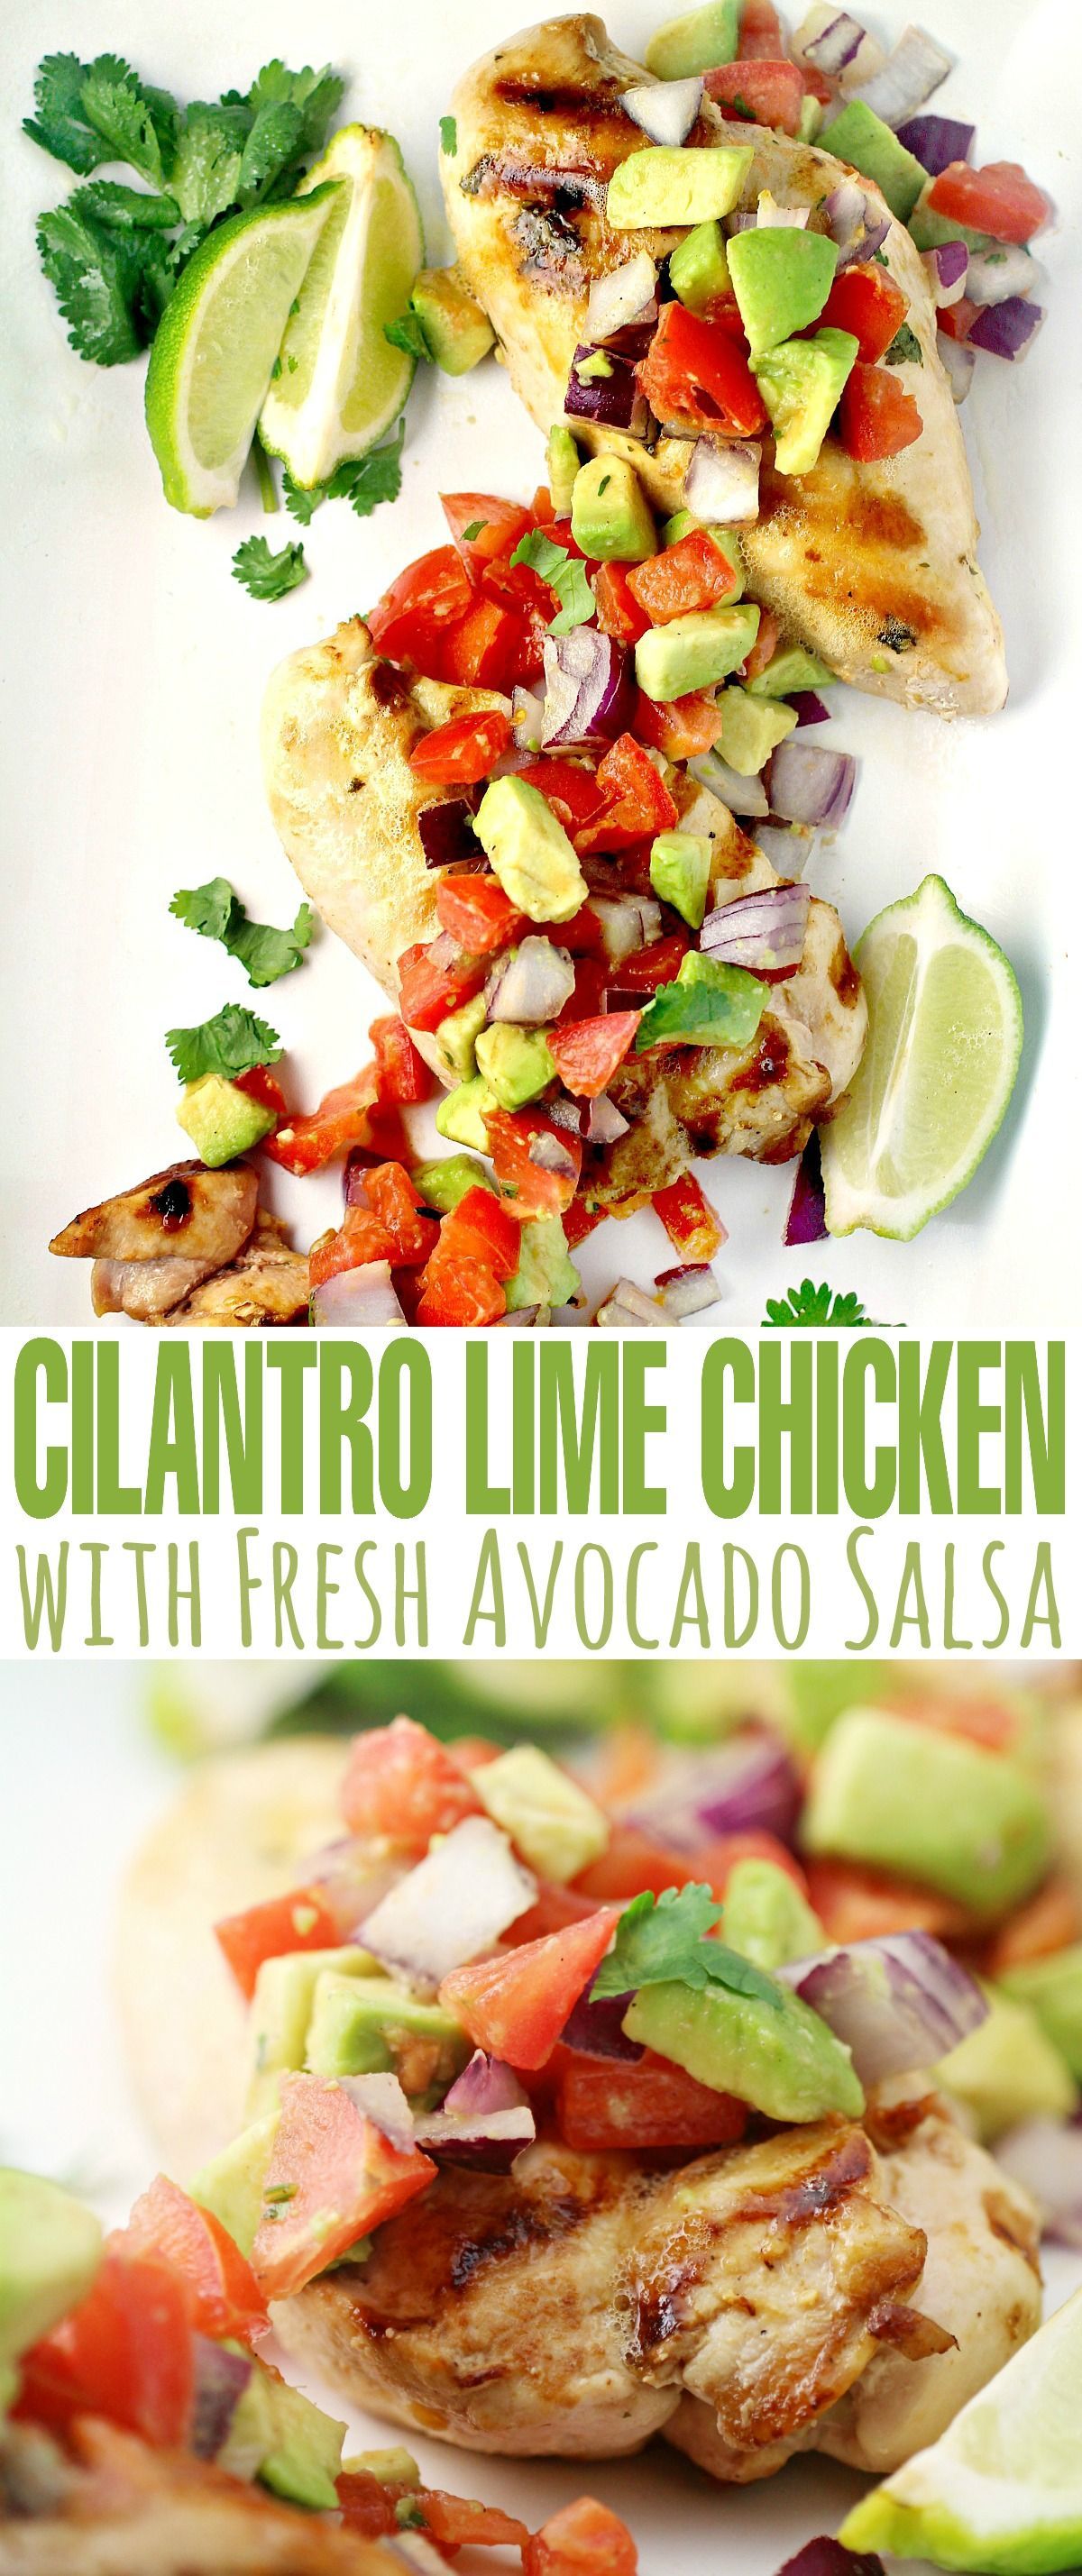 This Cilantro Lime Chicken with Fresh Avocado Salsa is delicious served with rice for a fresh tasting family dinner. It’s also a